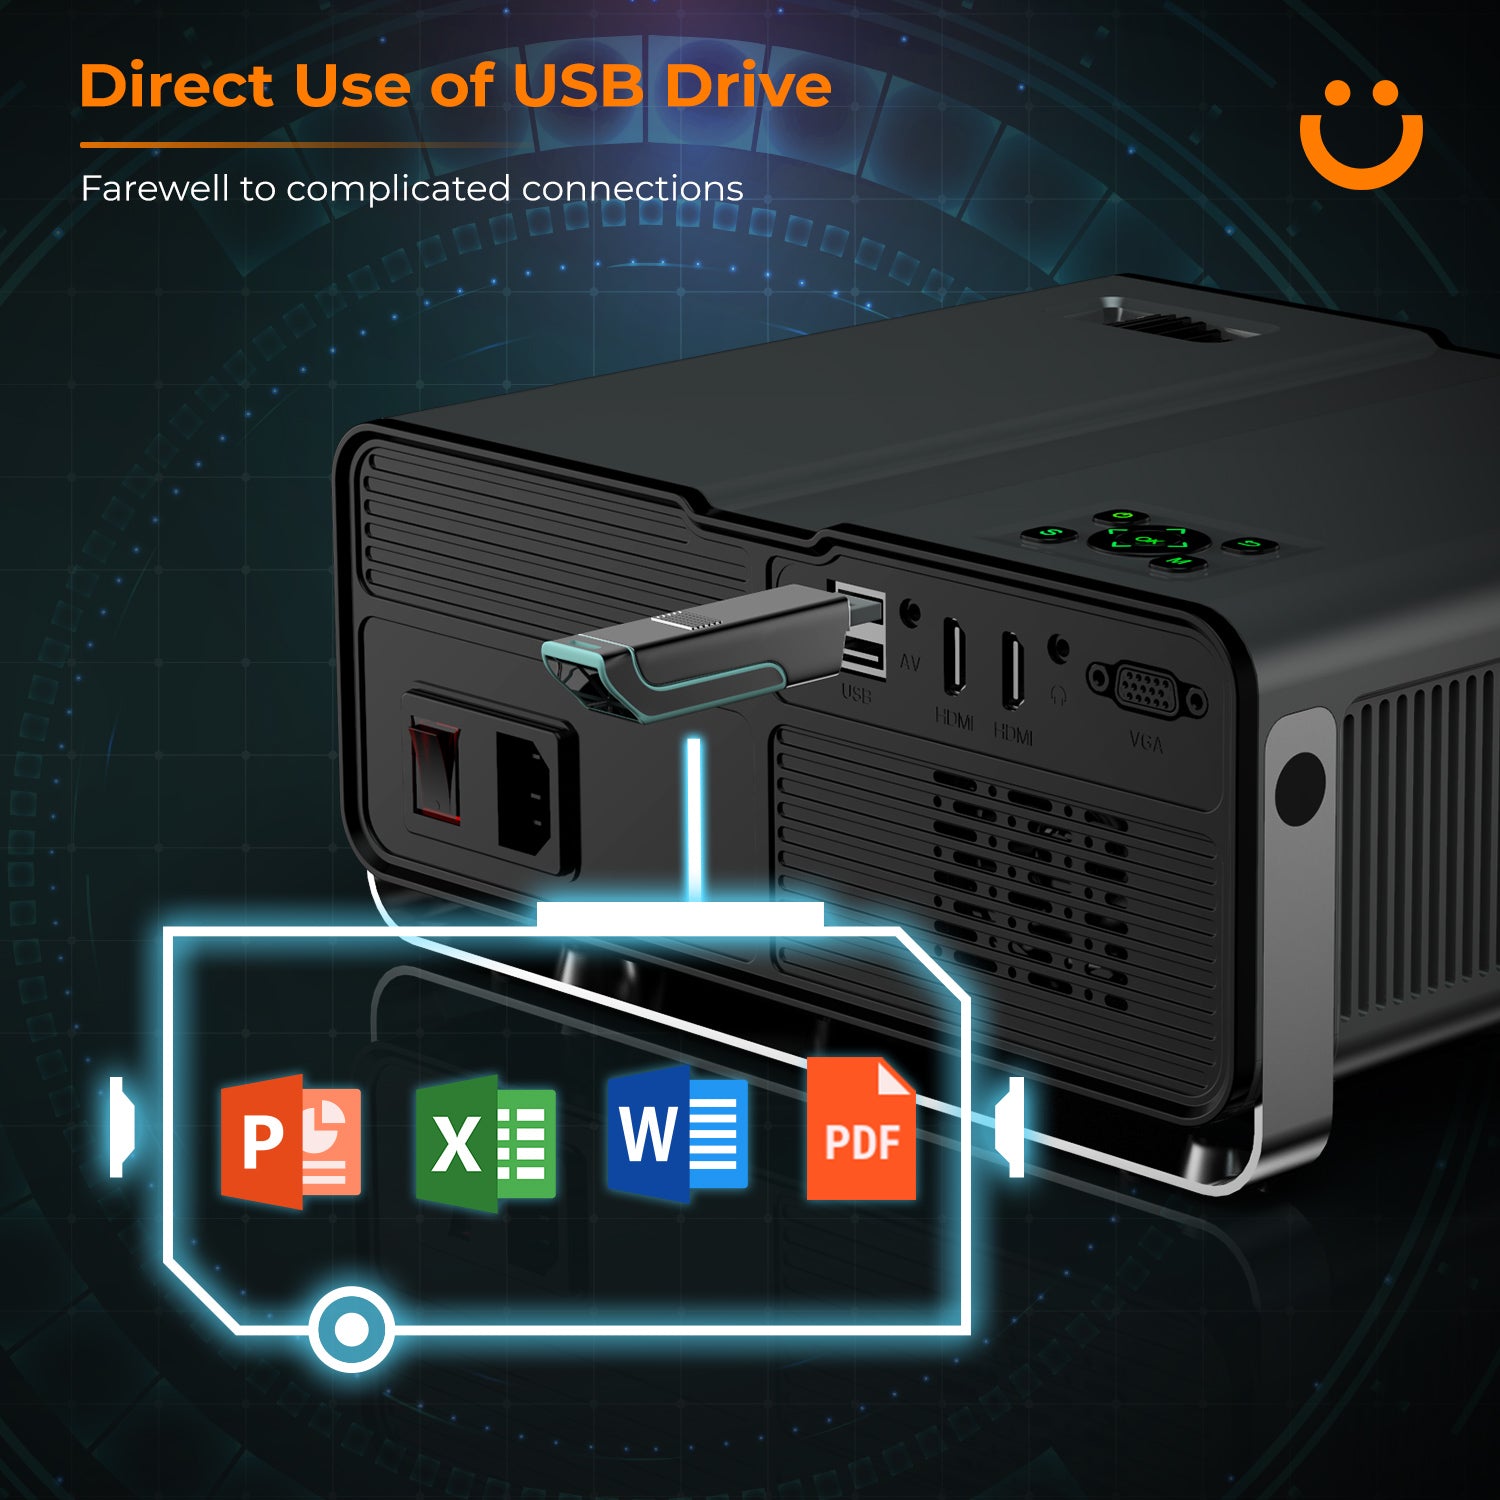 V10 can play Microsoft Office/ Adobe PDF /video files directly from the U disk and display them on the projector. Suitable for small meetings, farewell to complicated connections, V10 is apparently more efficient and time-saving!